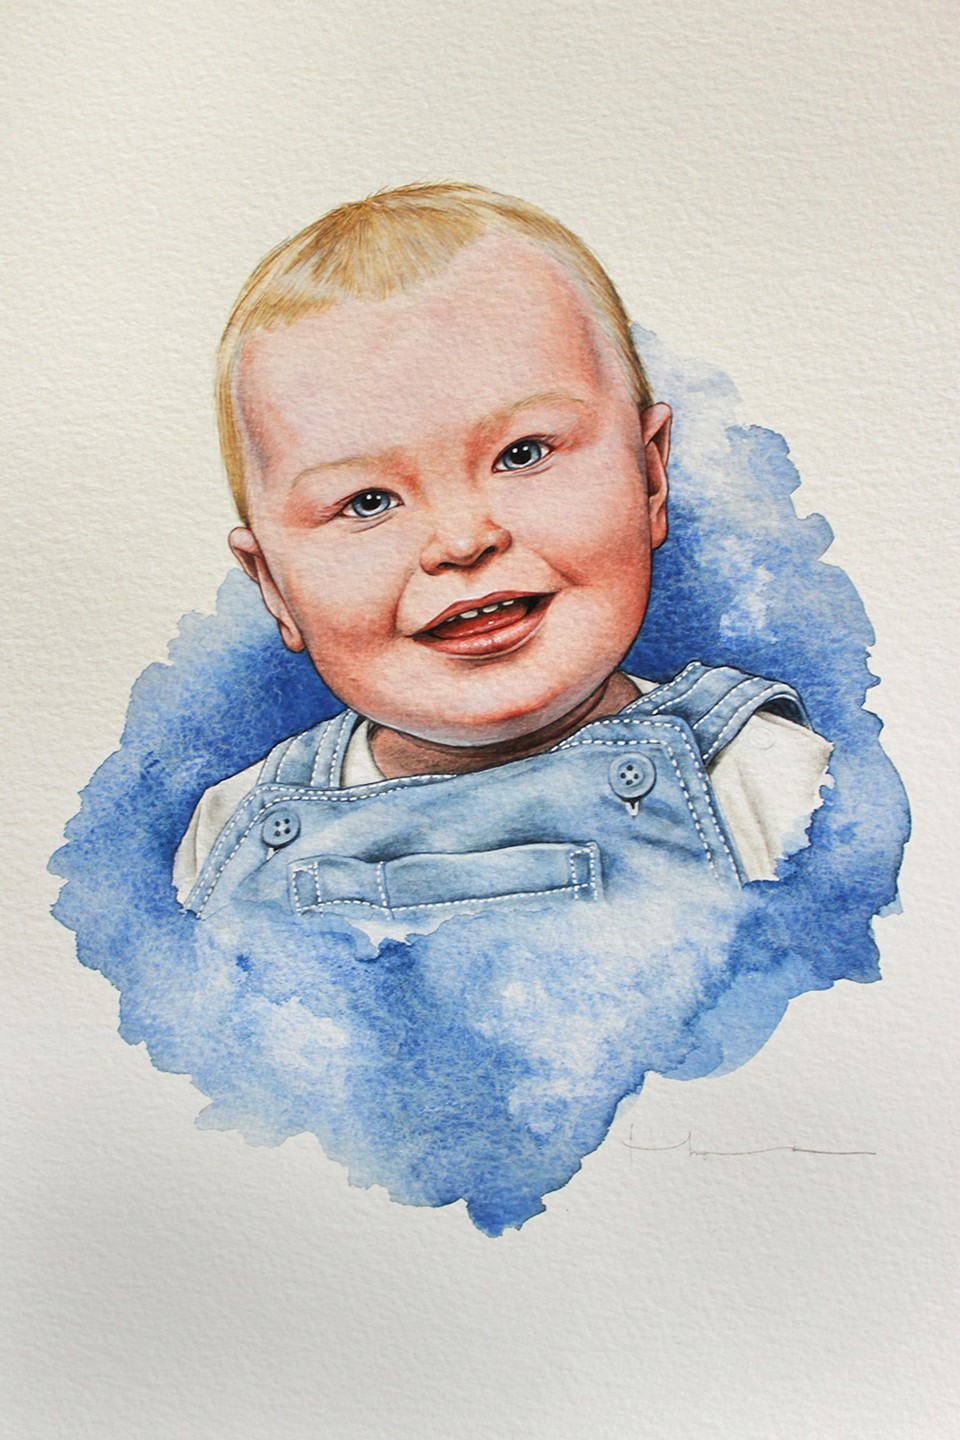 A family portrait of a baby son using mixed media.